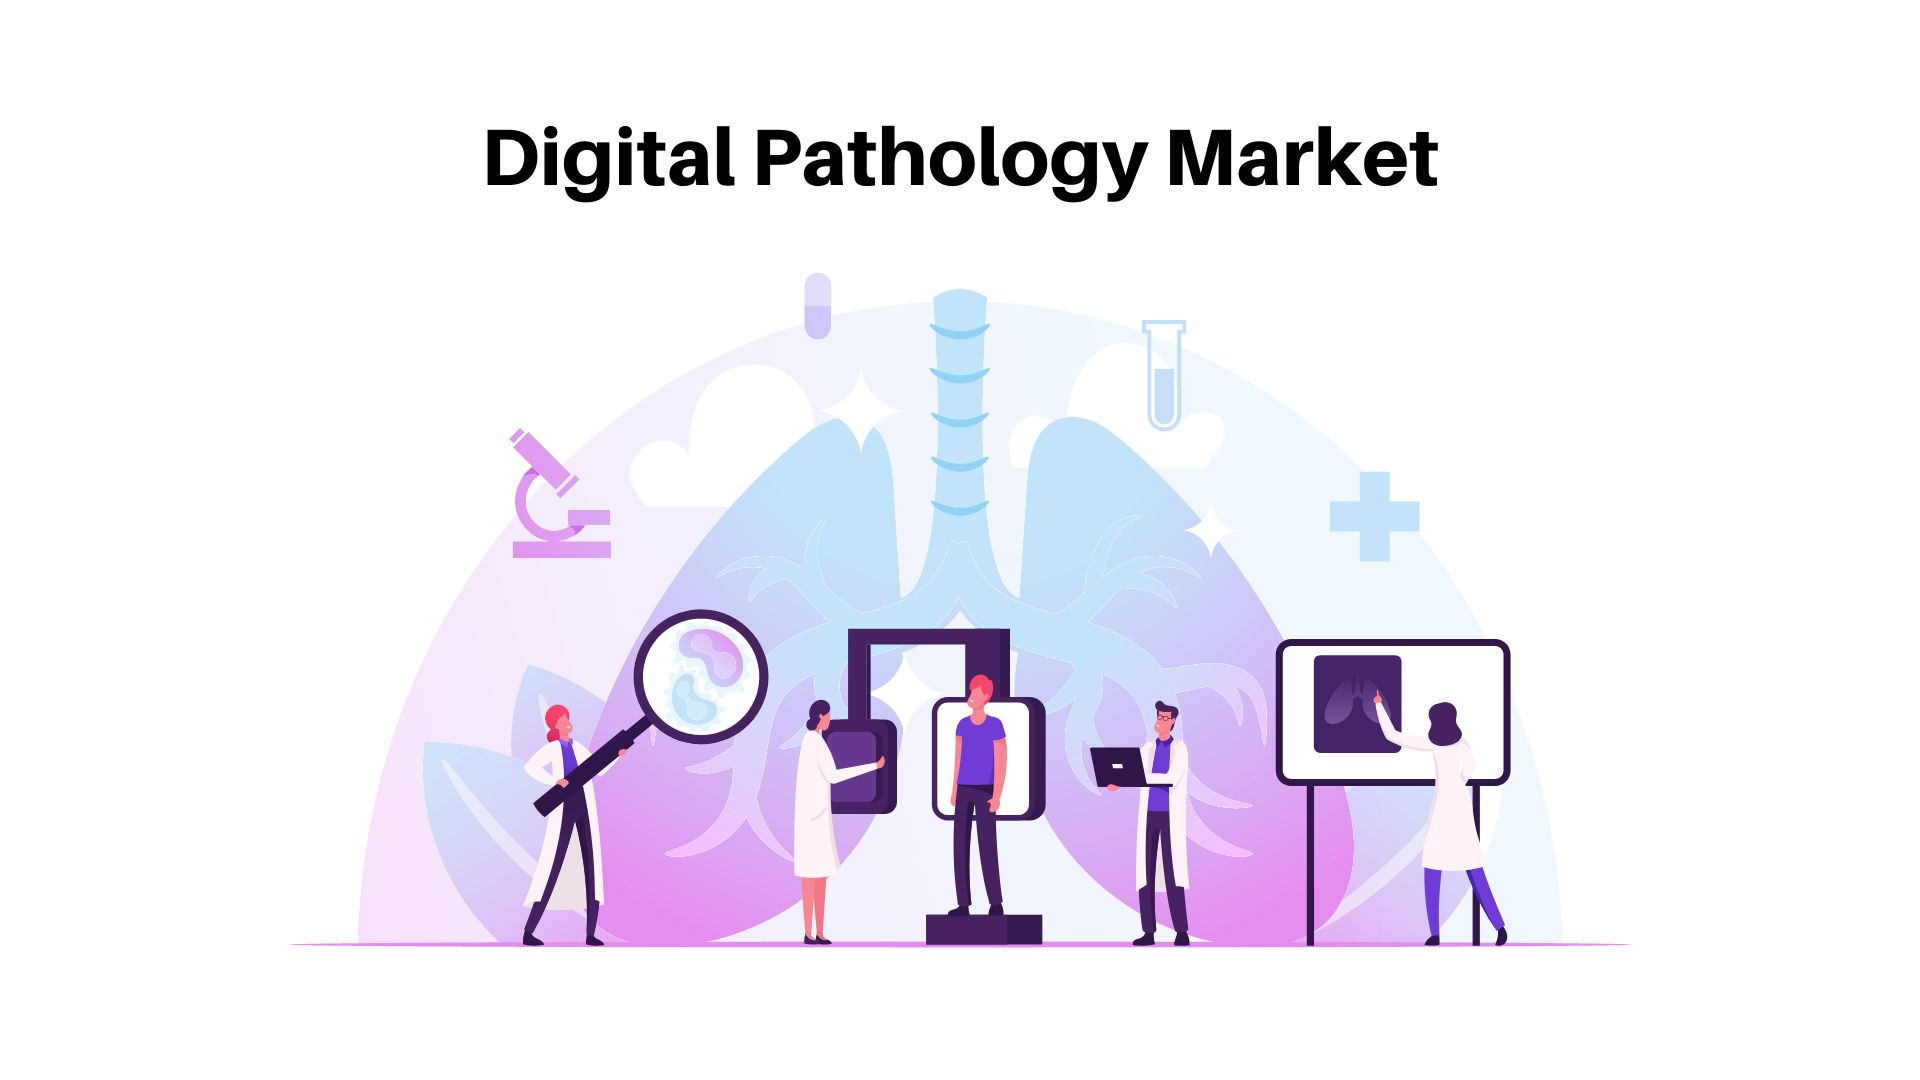 Digital Pathology Systems Market is Estimated to Showcase Significant Growth of USD 1.36 Bn in 2032 With a CAGR 4.2%